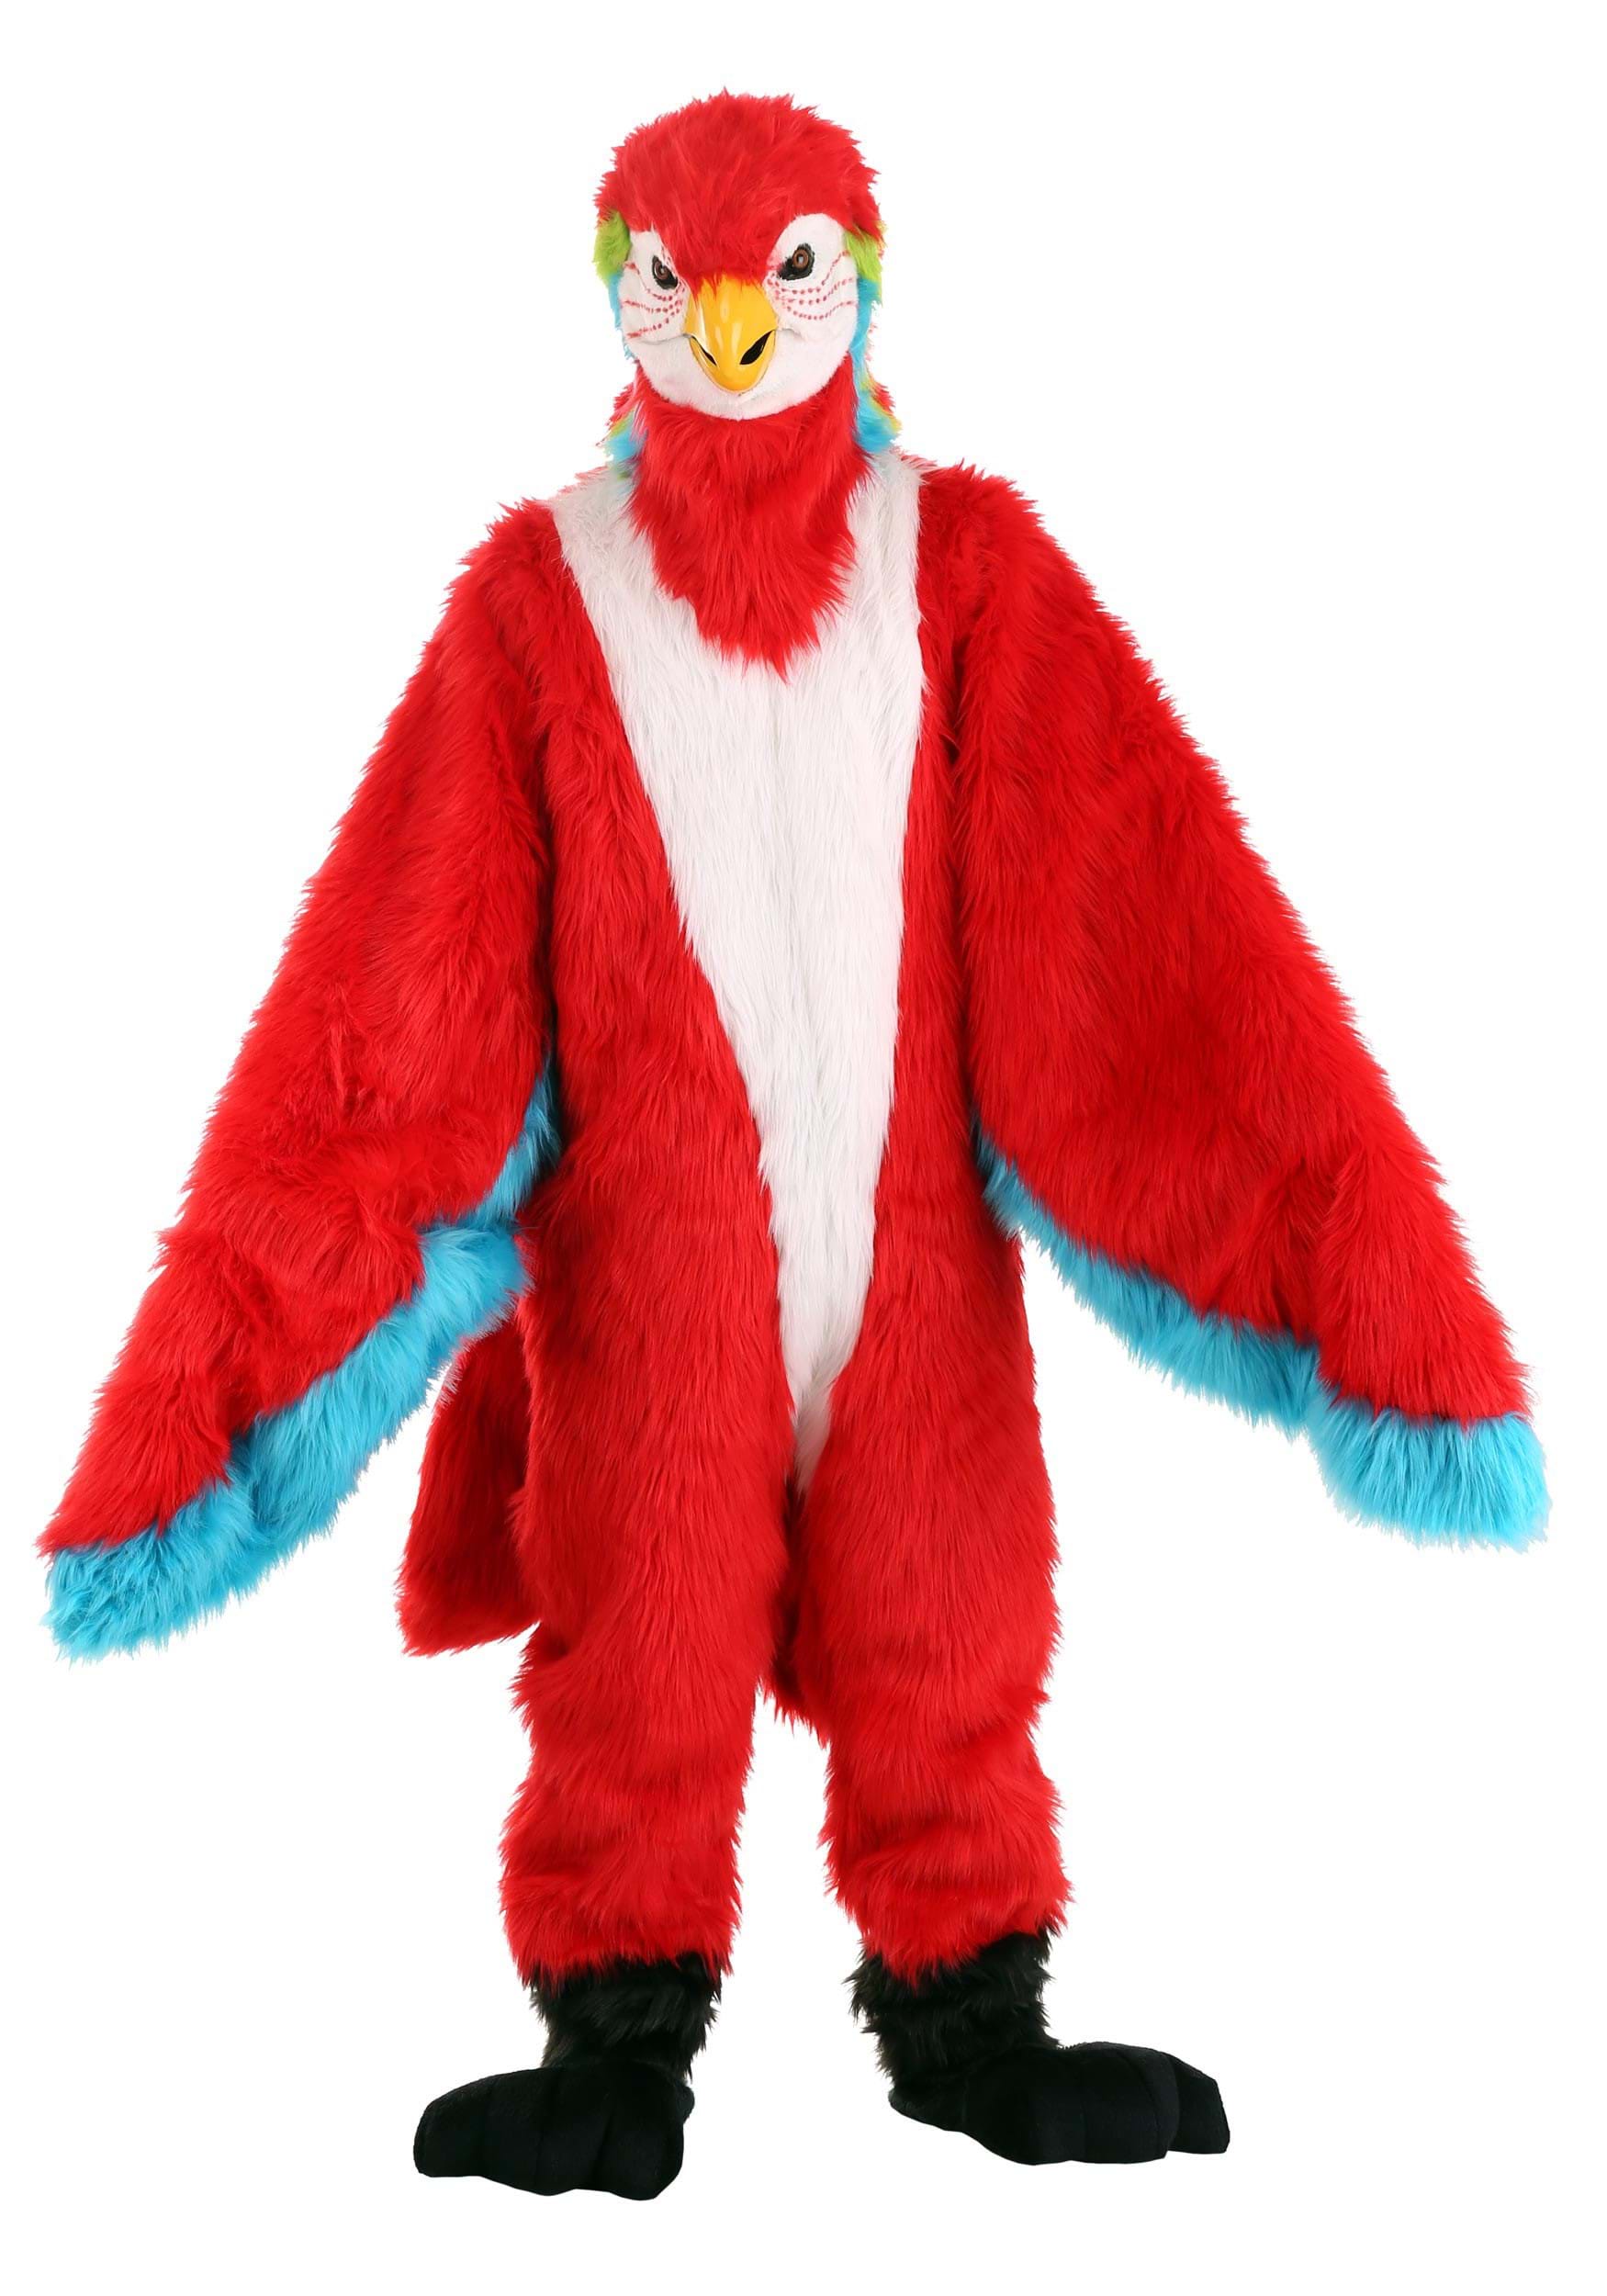 Image of Parrot Mascot Costume for Adults ID EL451710-ST